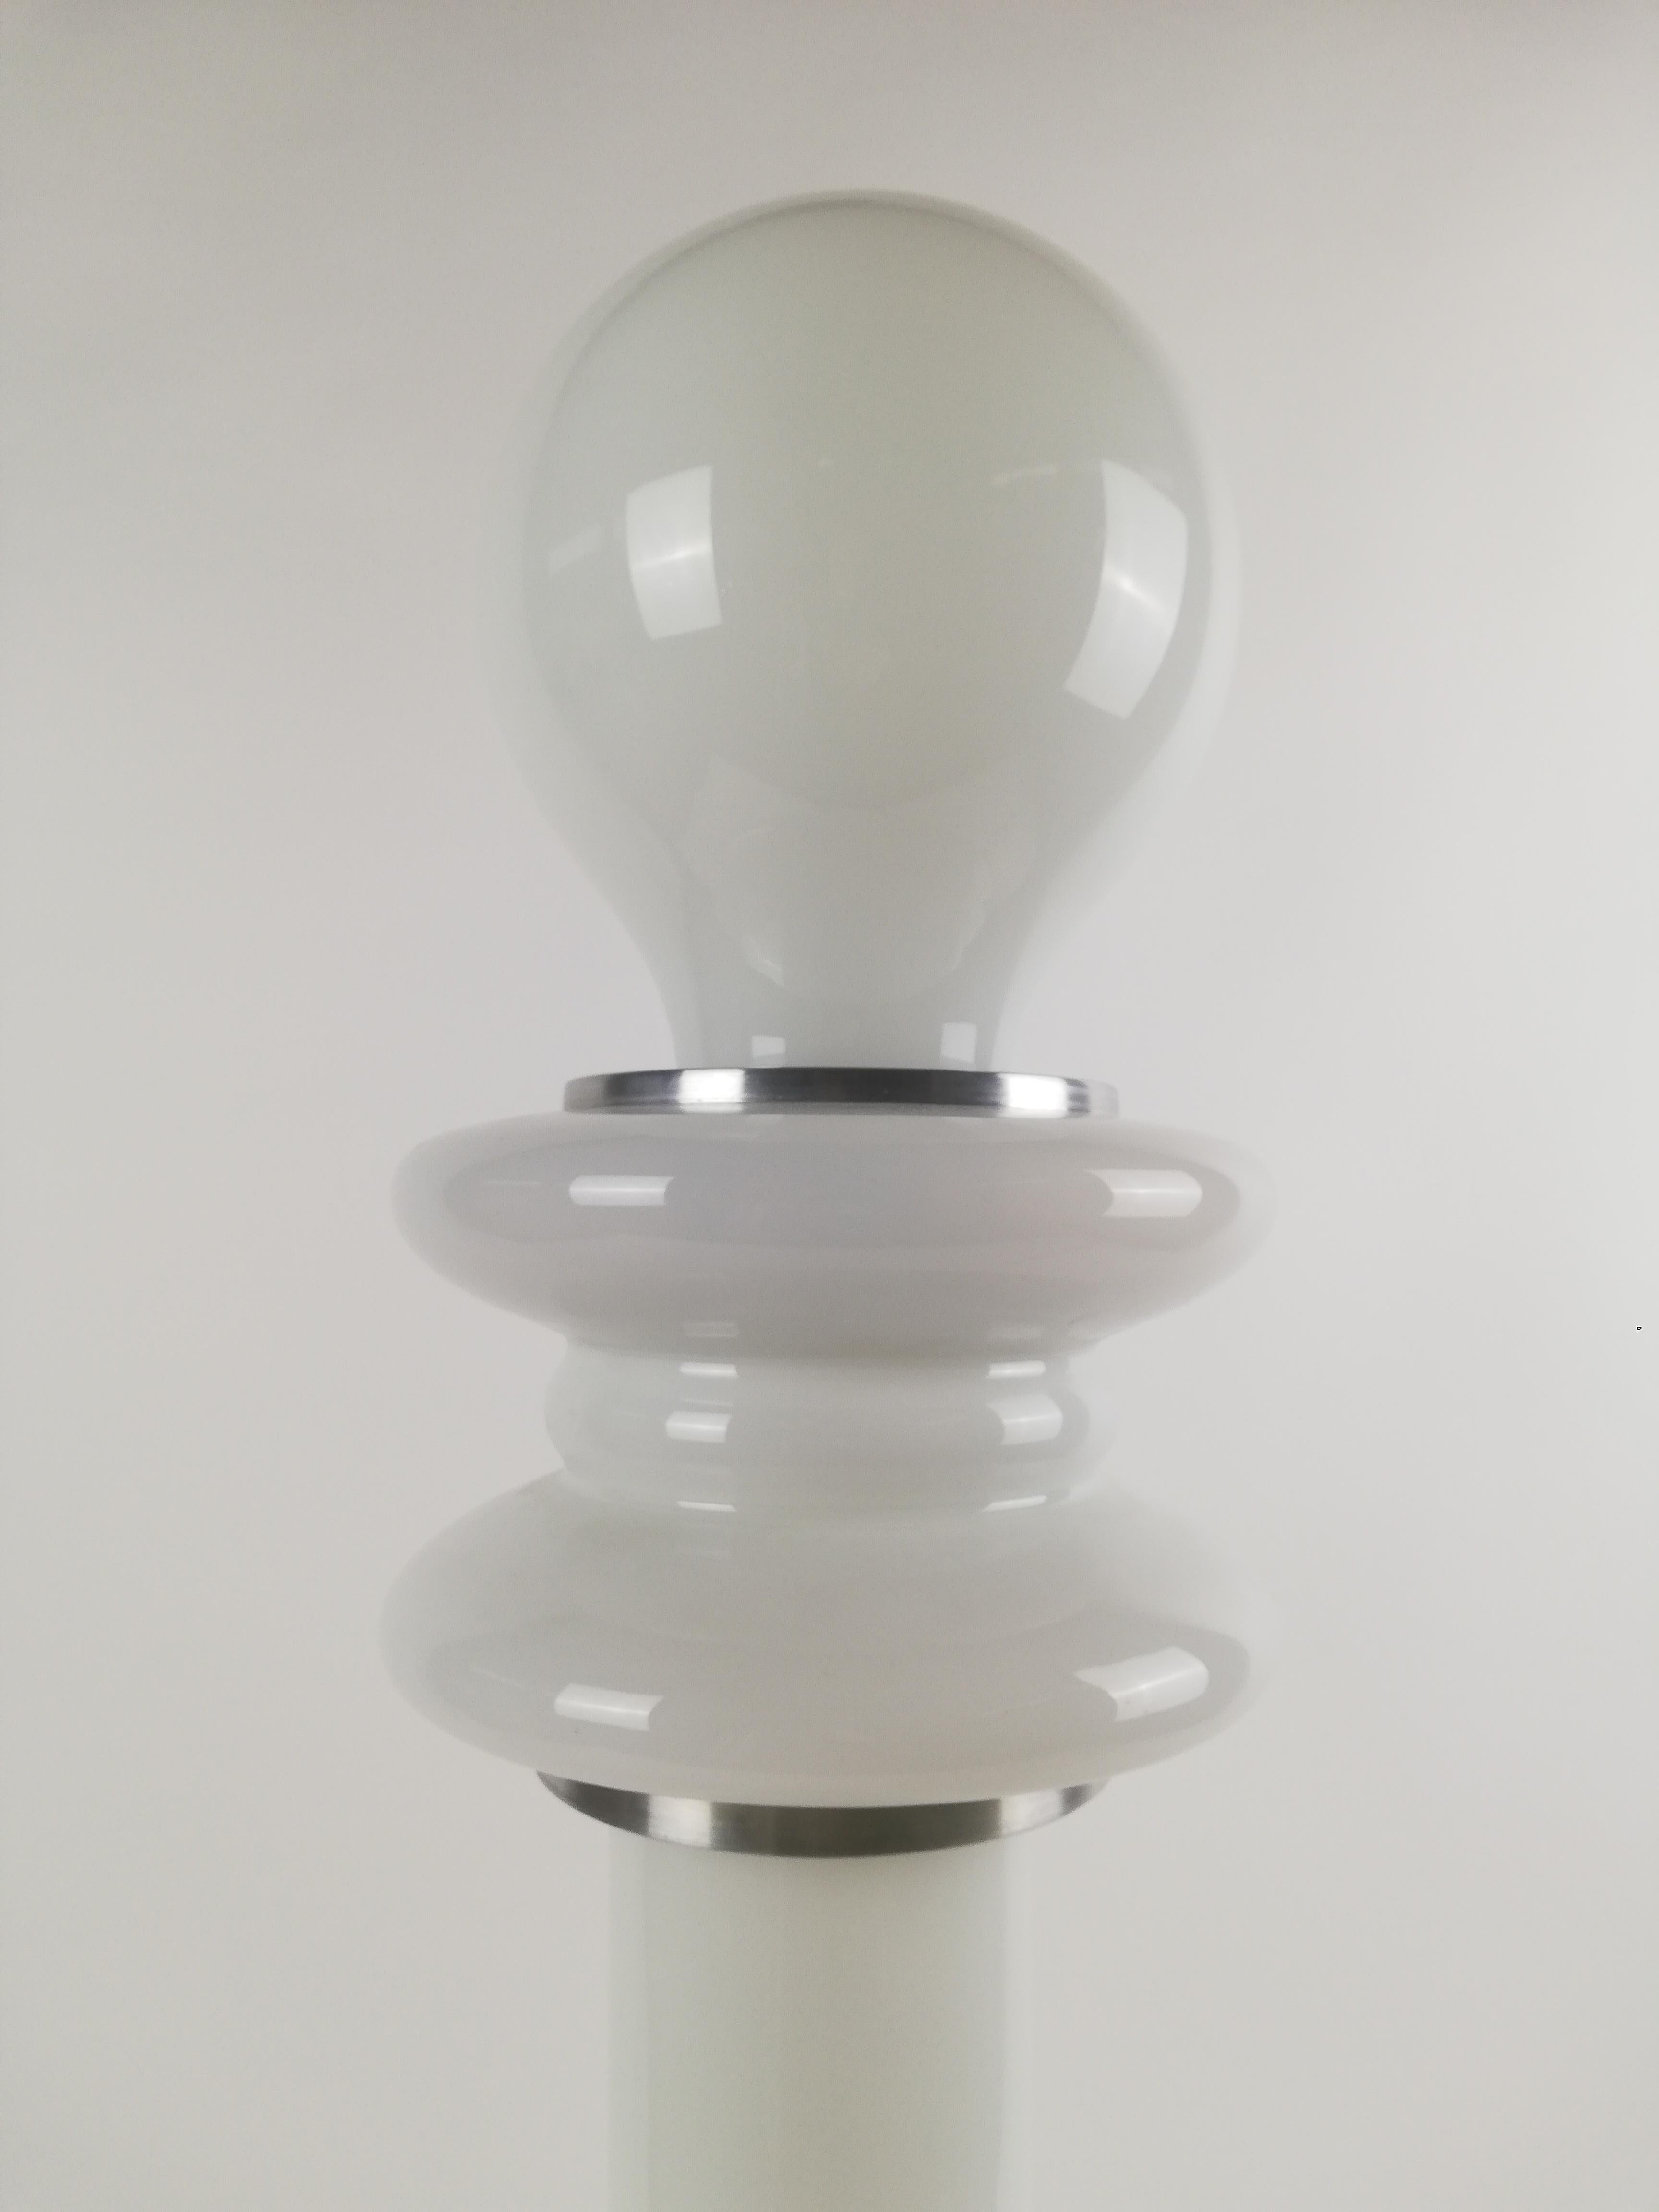 A splendid floor lamp made in Italy between the 1960s and 1970s in the style of the products designed by Carlo Nason.
The floor lamp has the typical mushroom shape of Space Age lamps.
It is composed of 3 parts in white opaline glass , the lowest